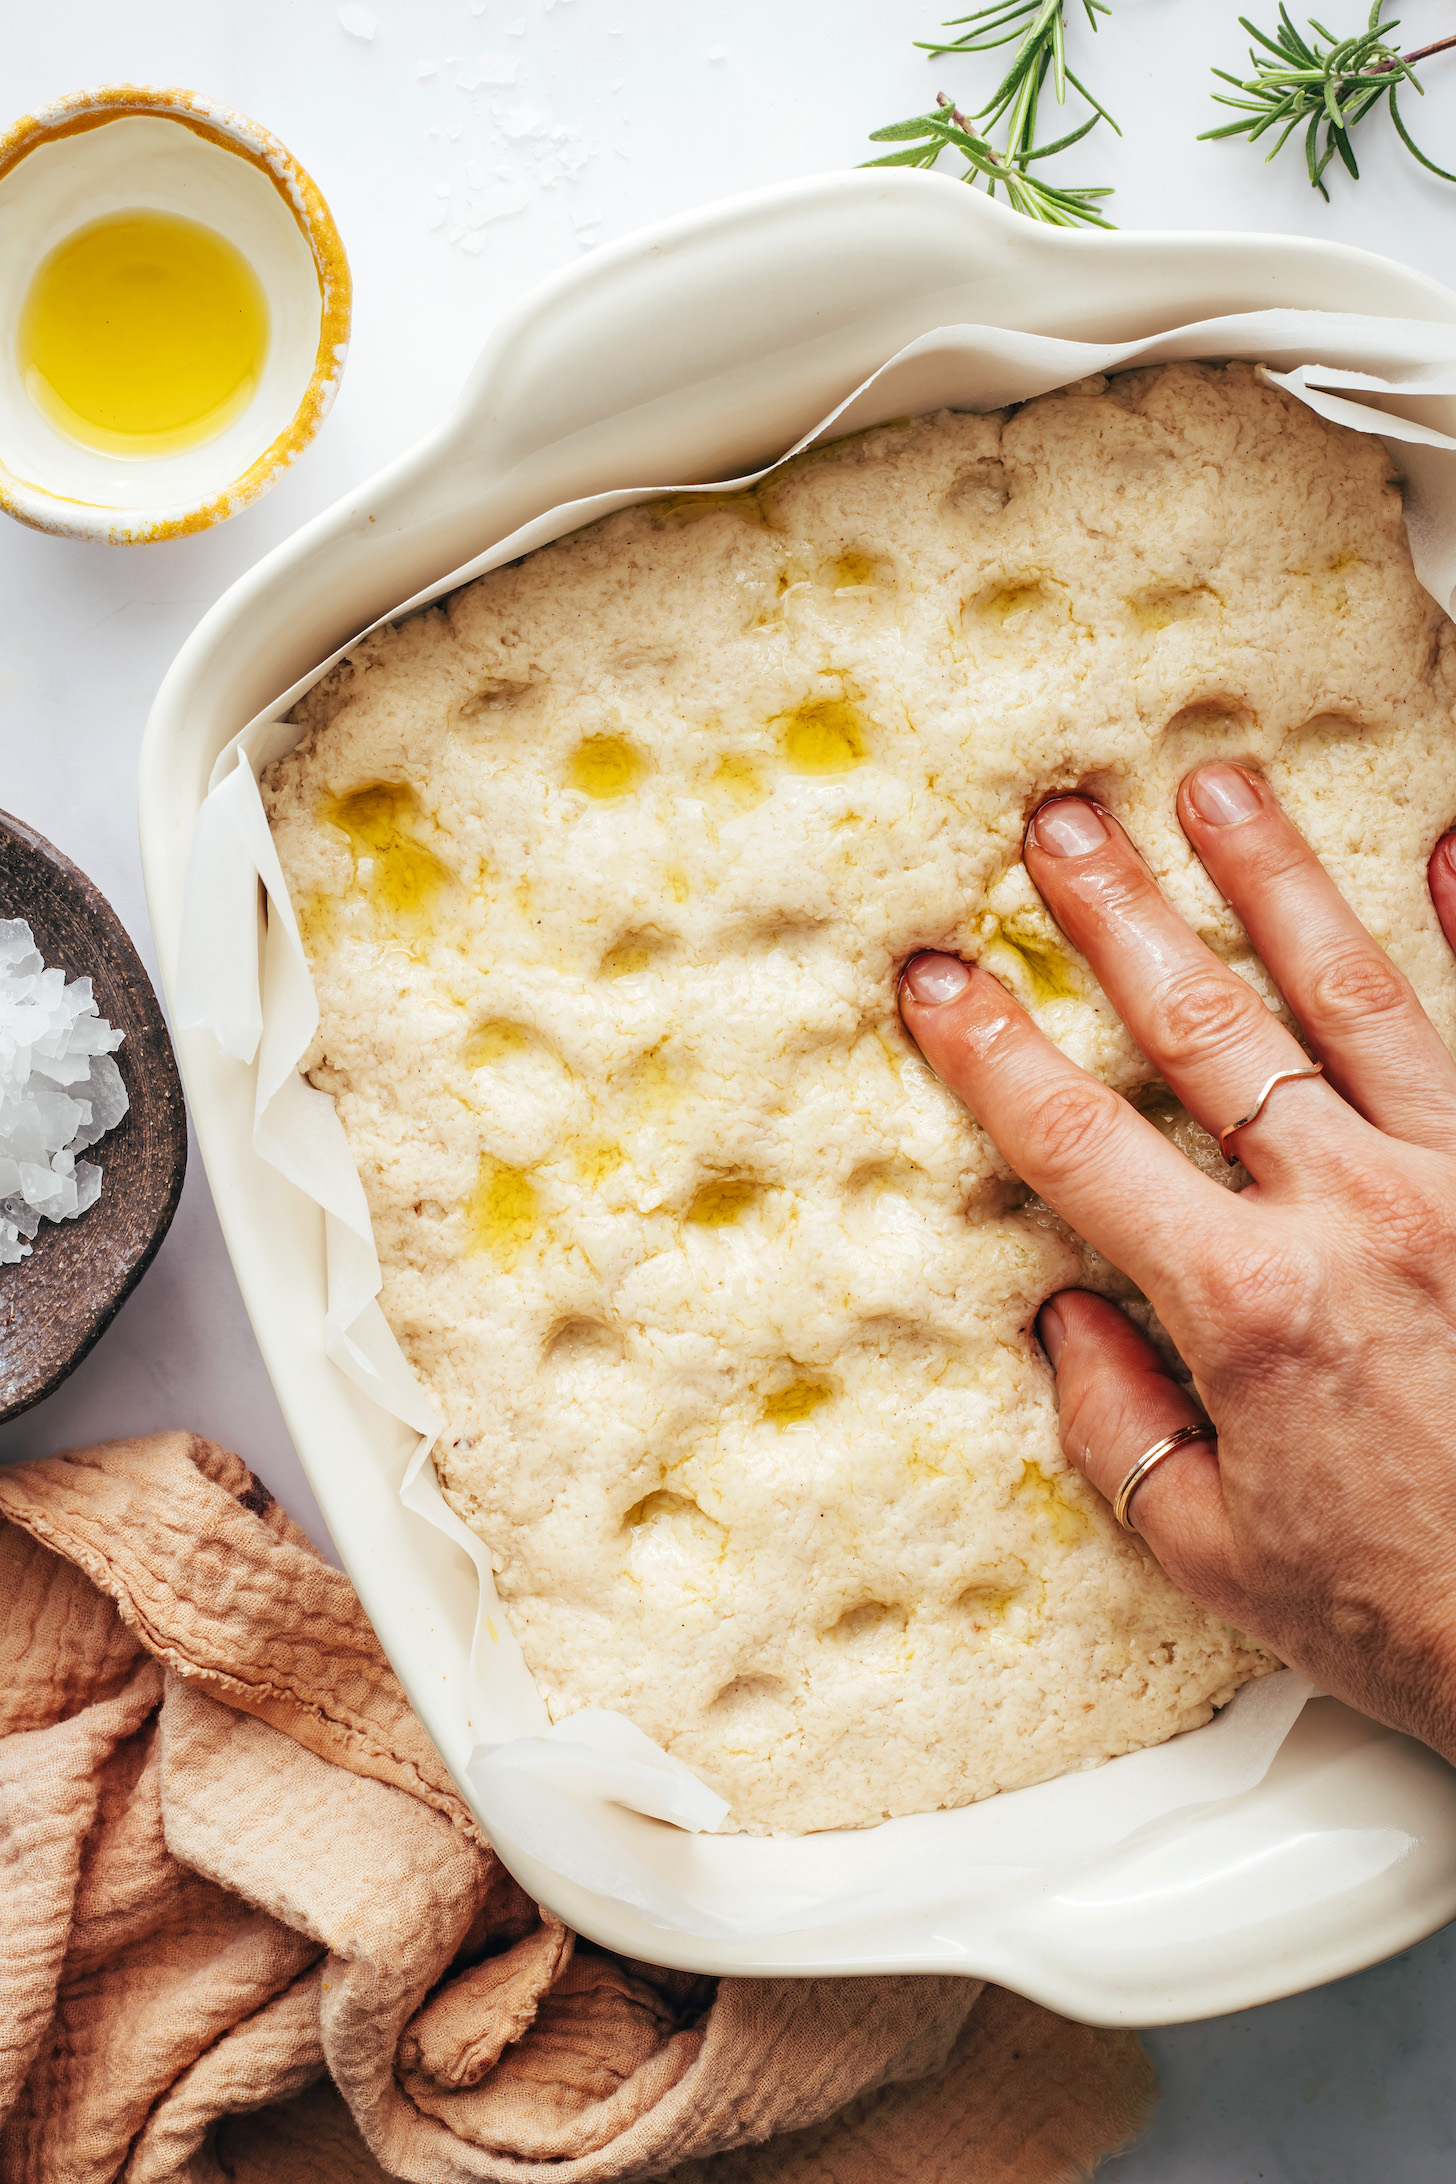 Pressing fingers into focaccia dough to create pockets on the top